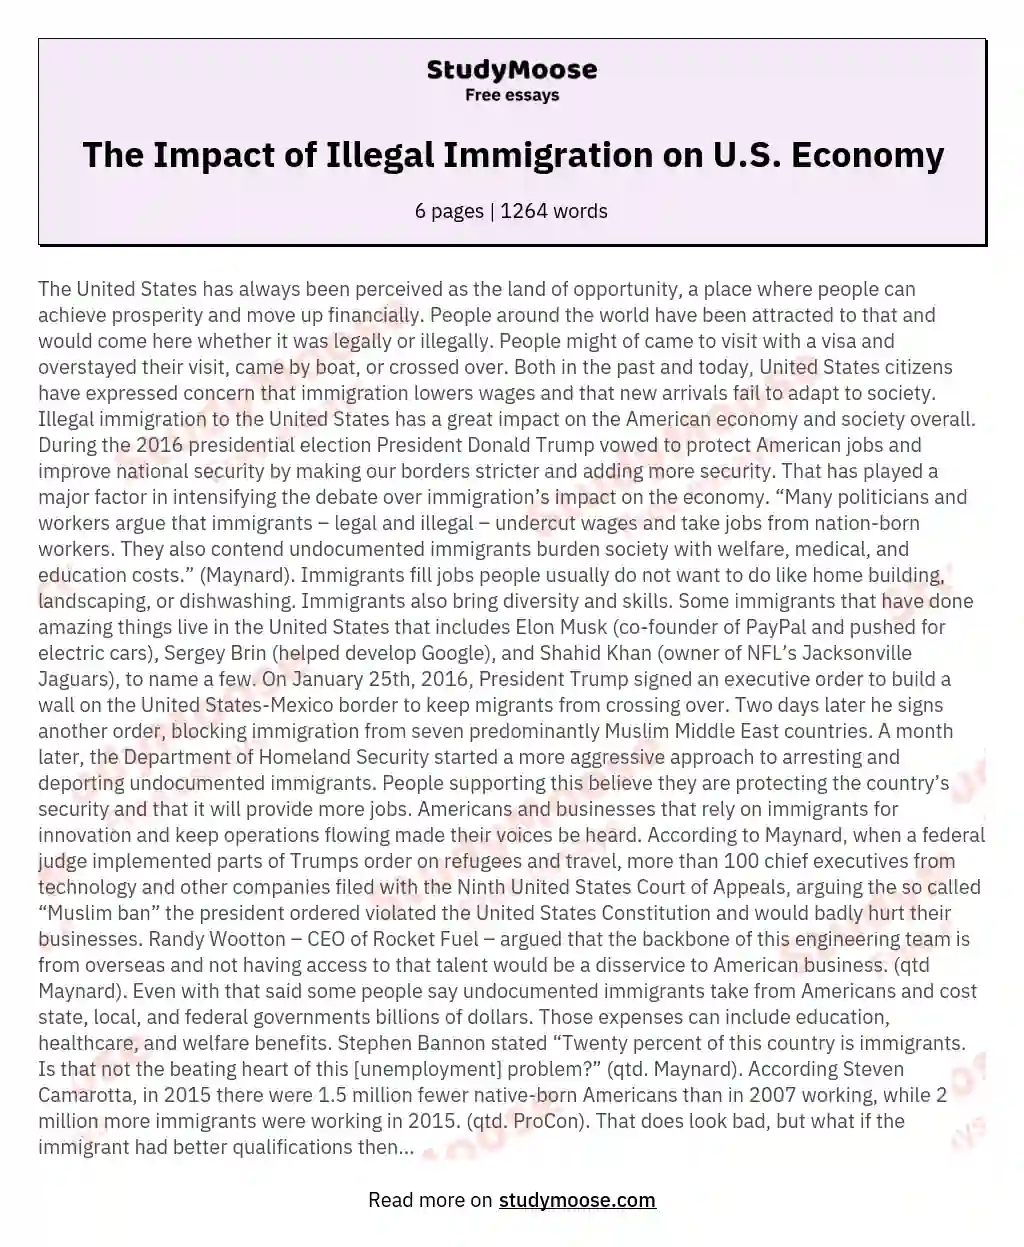 The Impact of Illegal Immigration on U.S. Economy essay